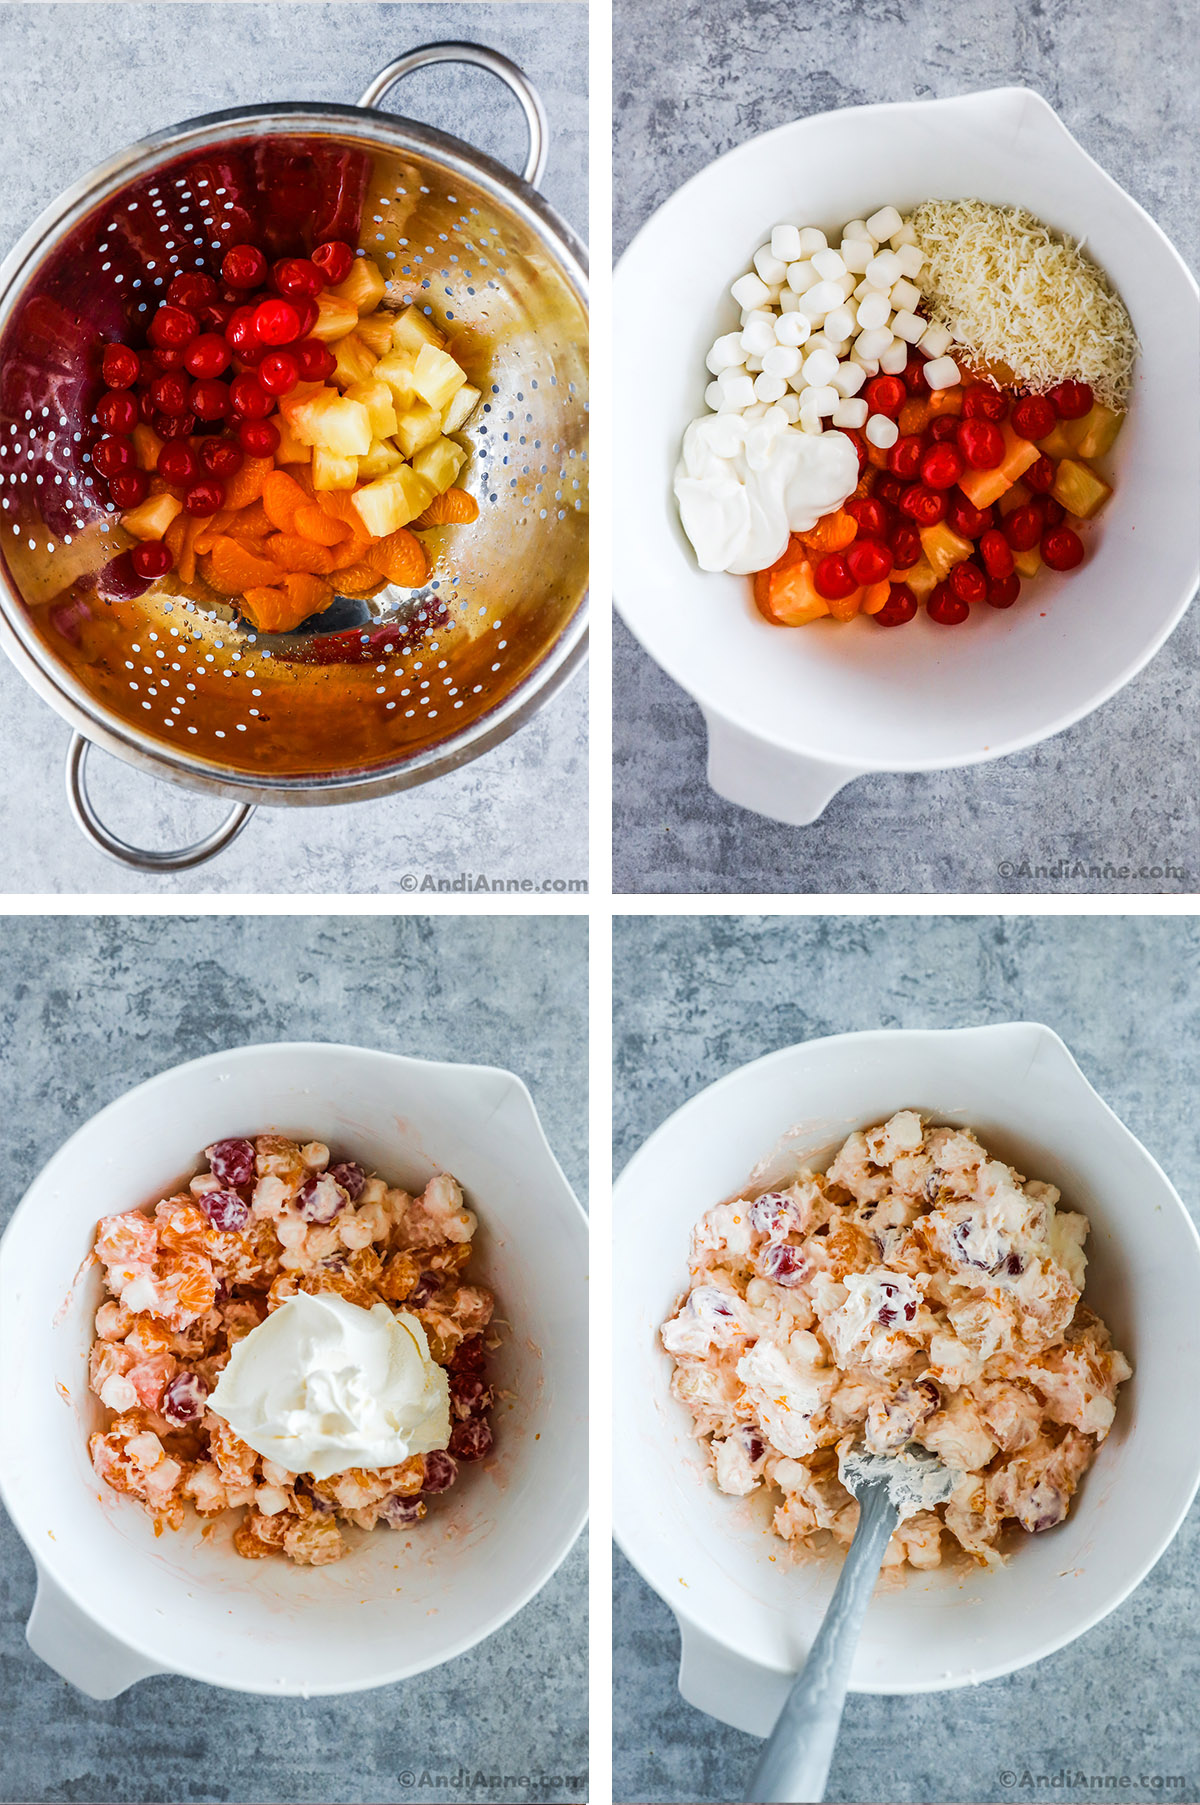 Four images showing various stages of making recipe, first is canned fruit in strainer, second is ingredients dumped in bowl unmixed, third is whipped topping dumped over mixed fruit, fourth is ambrosia salad recipe.